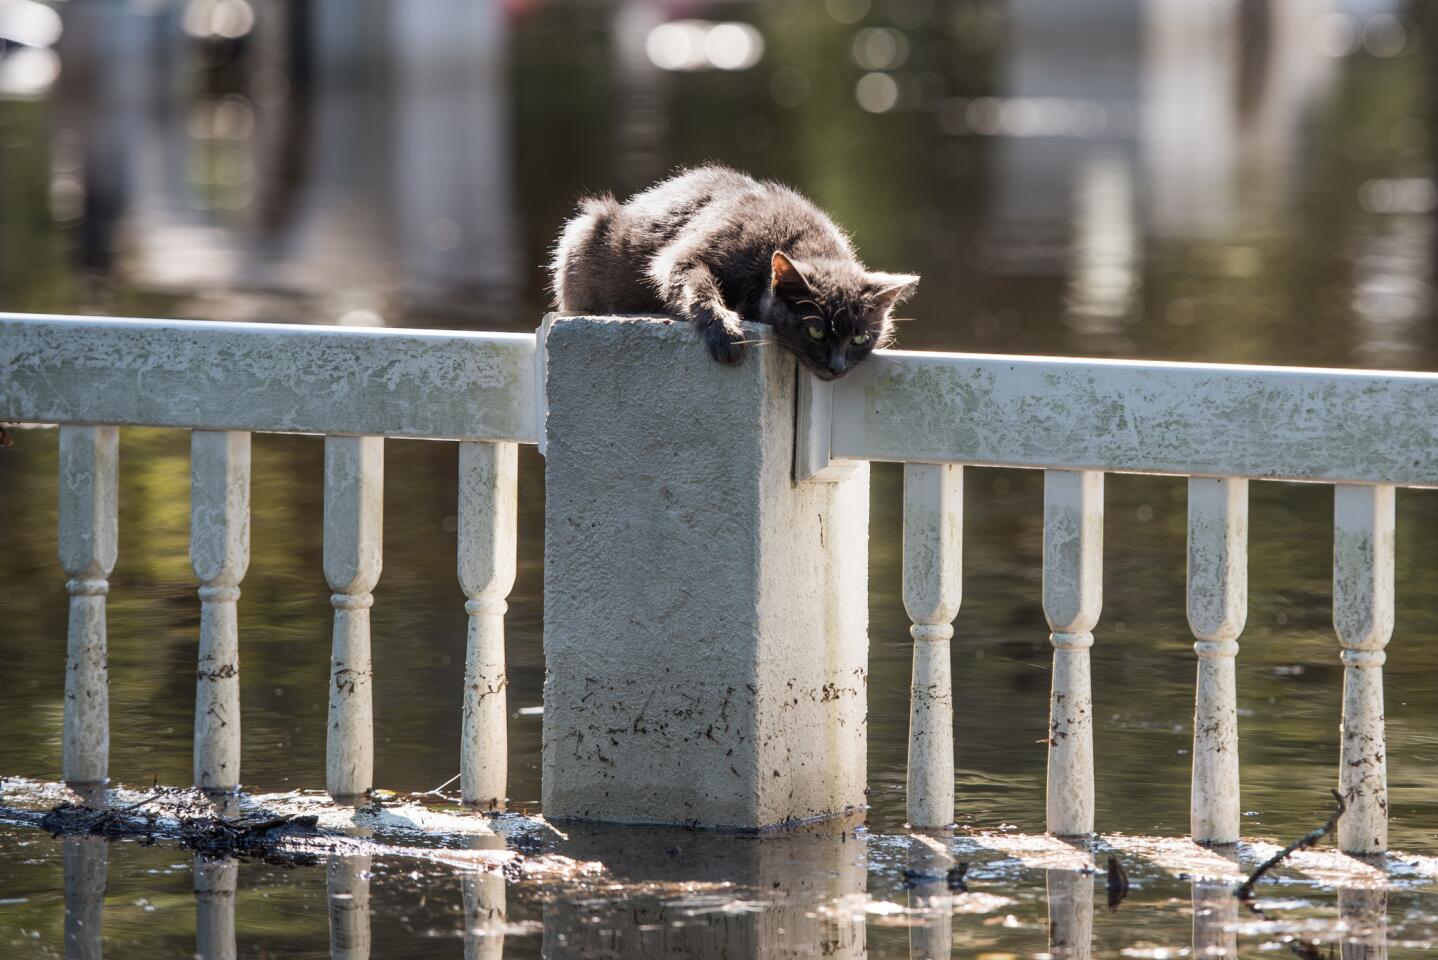 A cat is stranded on a fence due to floodwaters from the Lumber River on Oct. 11, 2016, in Fair Bluff, North Carolina.